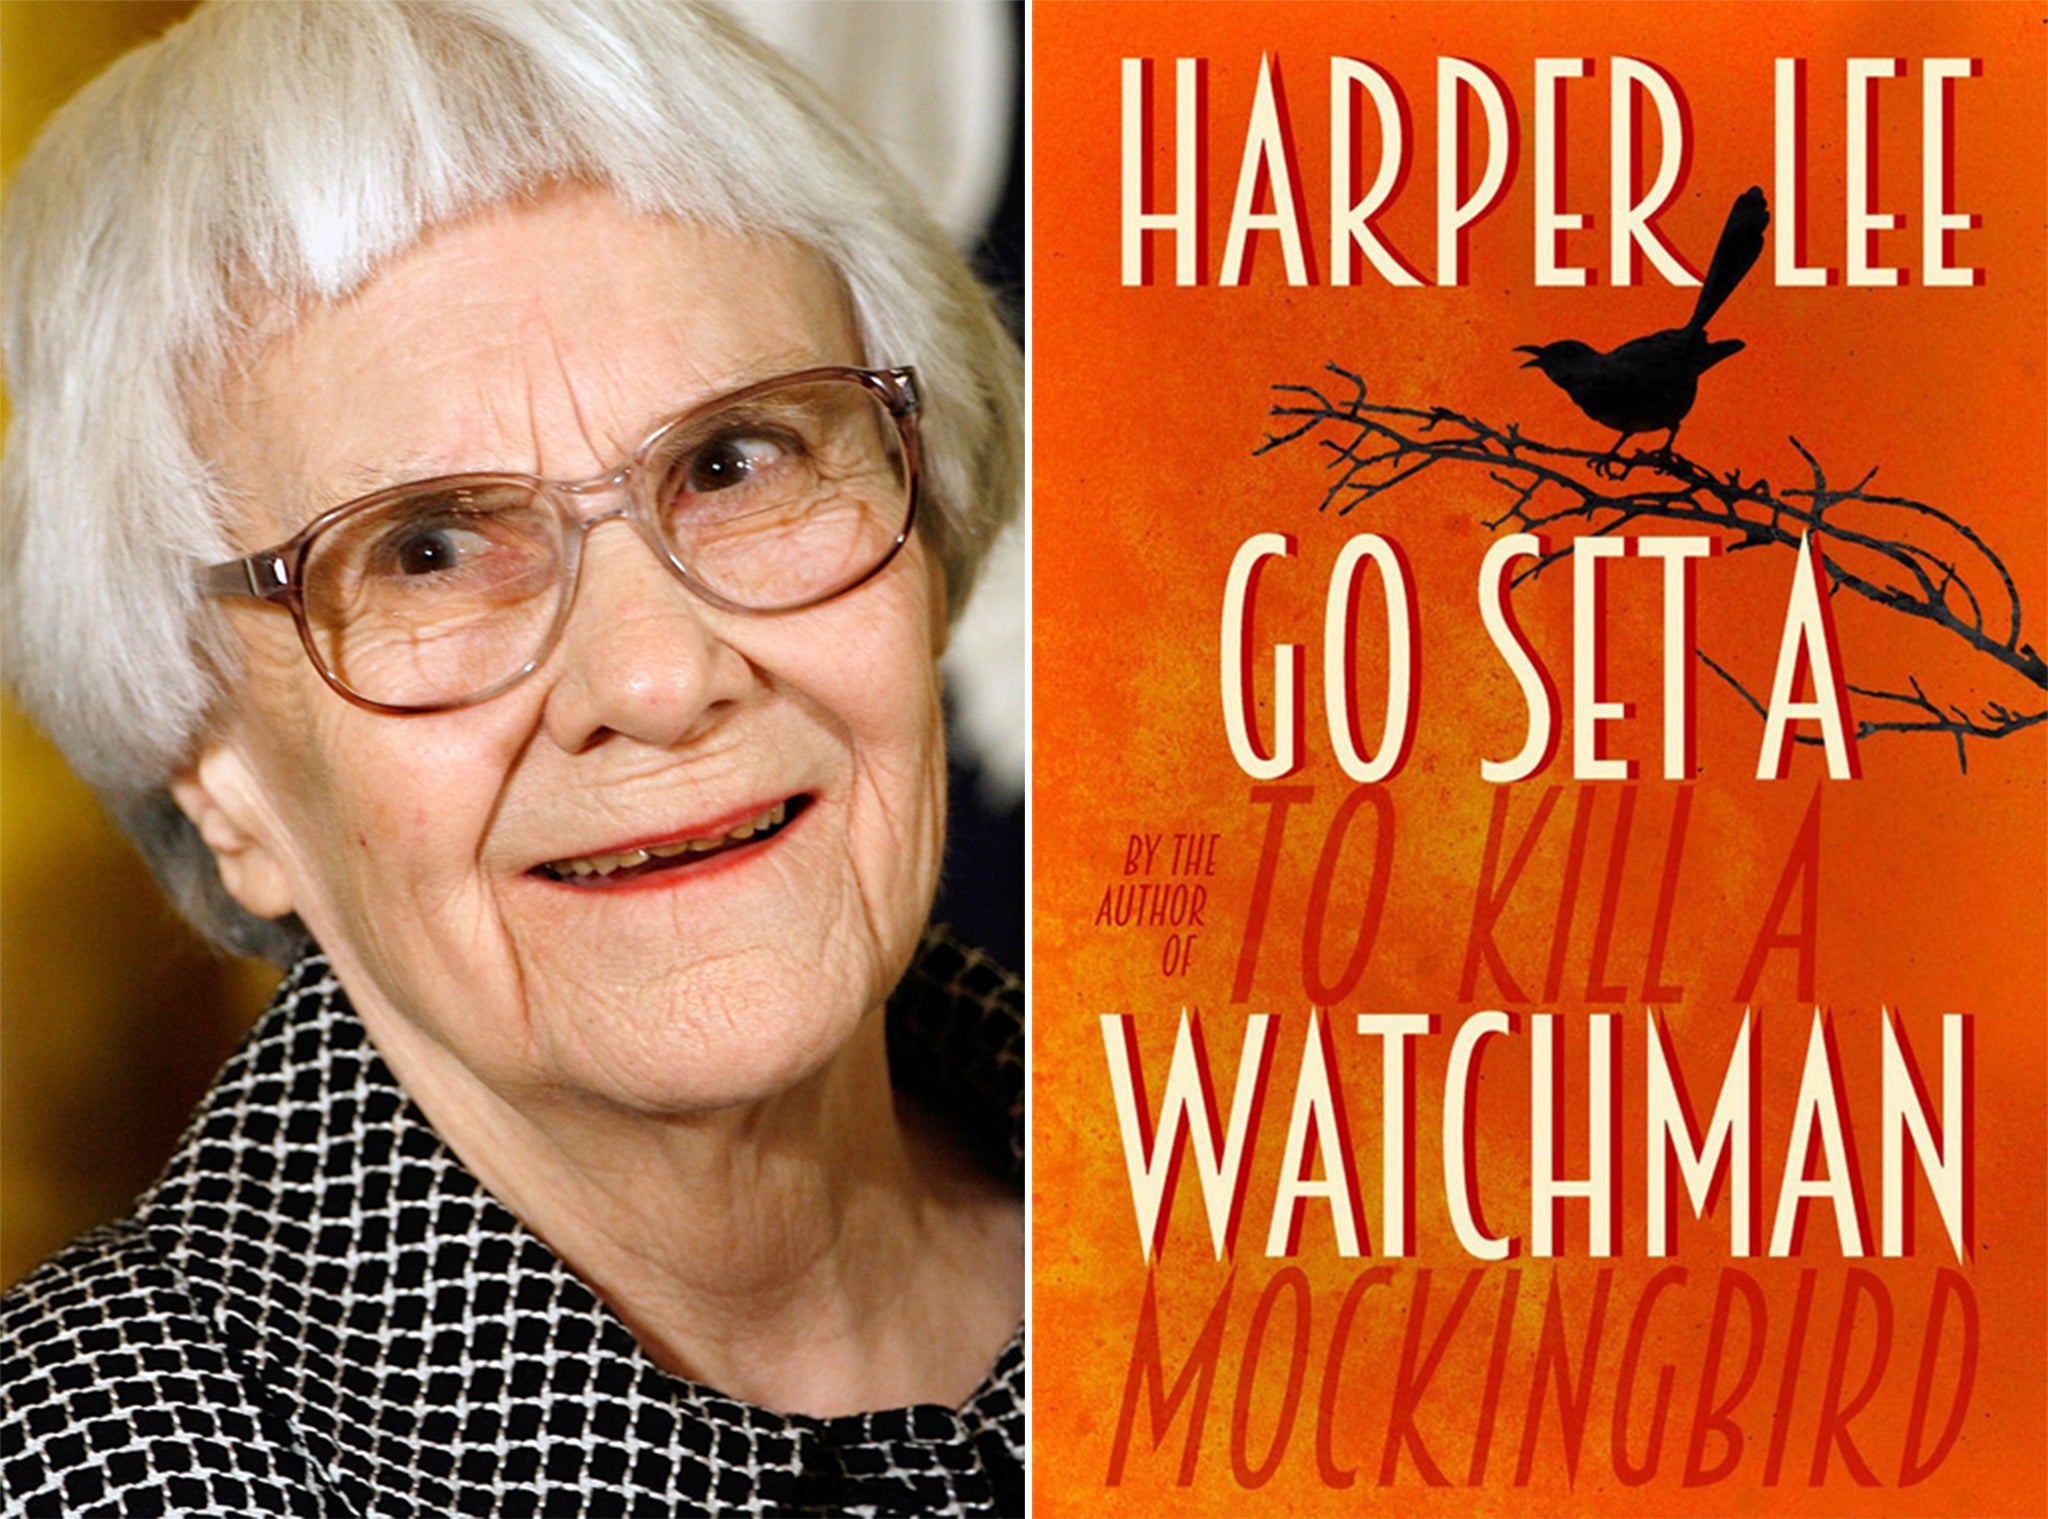 The manuscript of Harper Lee’s novel was found by her lawyer in 2014